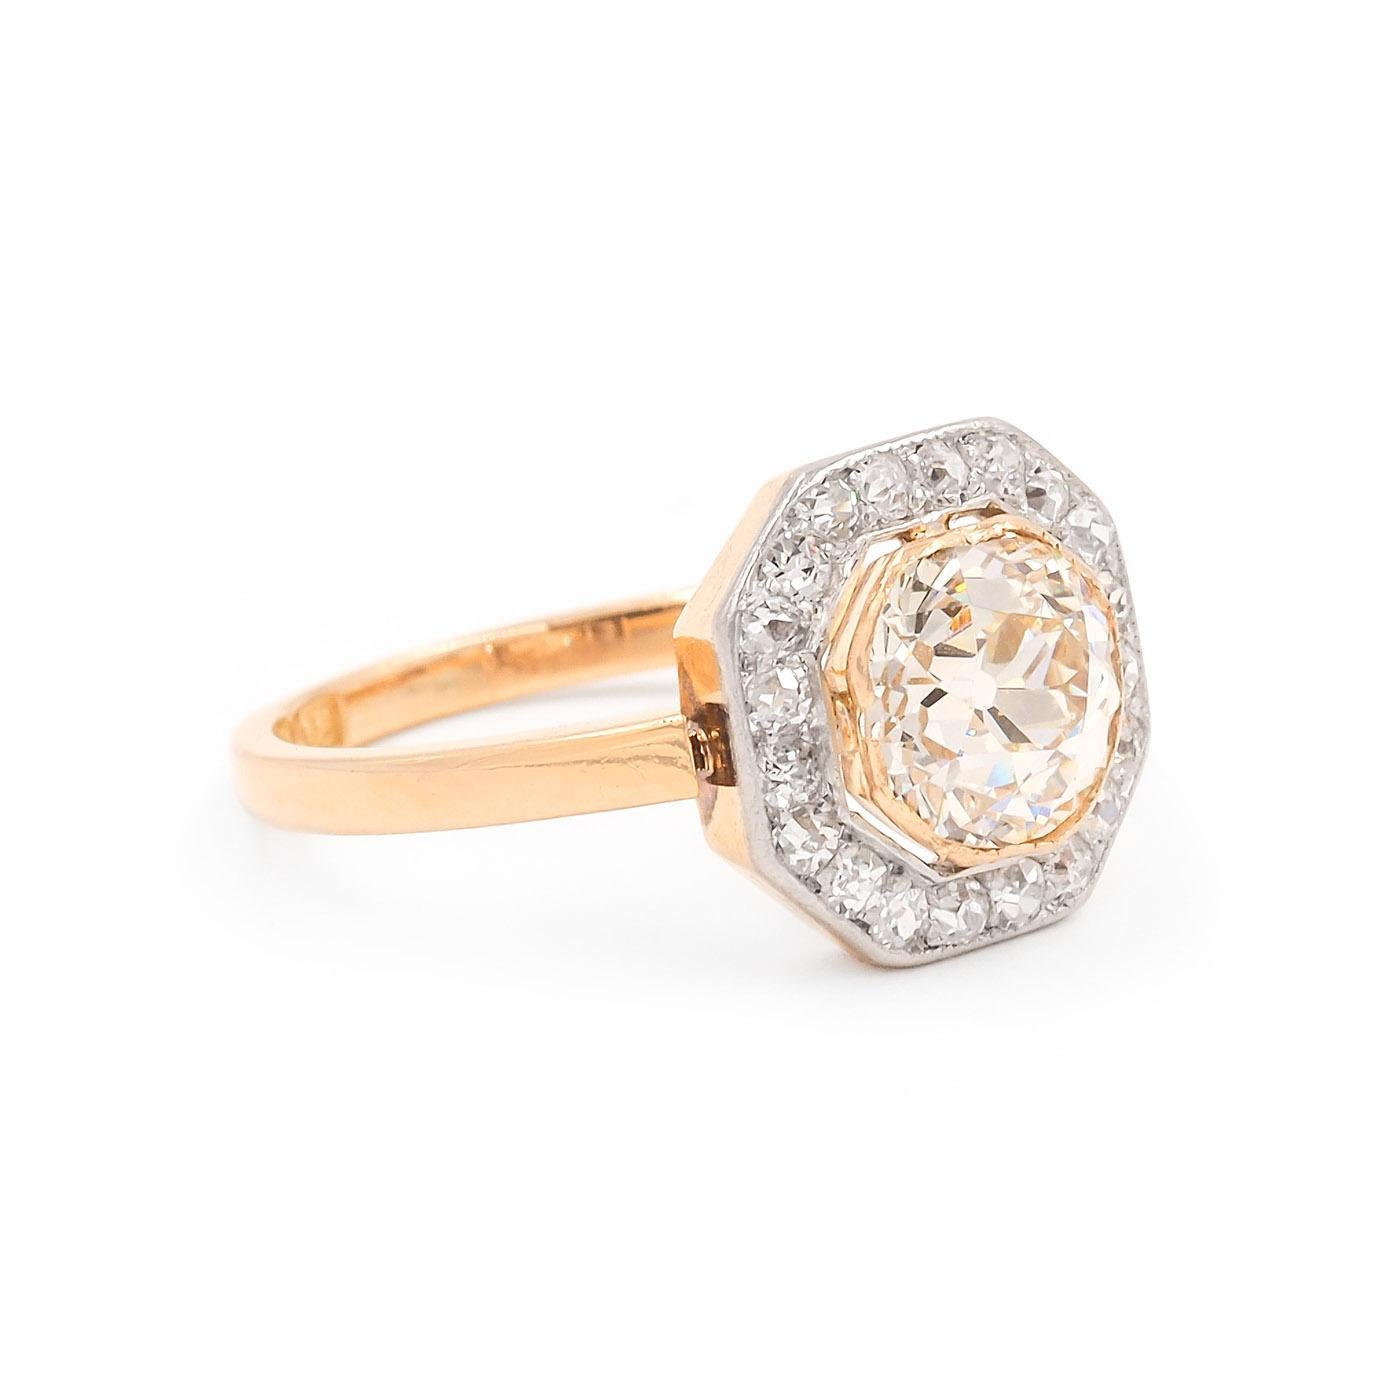 Edwardian era 1.70 Carat Old European Cut Diamond Cluster Engagement Ring composed of 18k yellow gold and platinum. With a 1.70 Carat Old European Cut diamond, GIA certified N color & SI1 clarity. The center diamond is set in an 18k gold octagonal